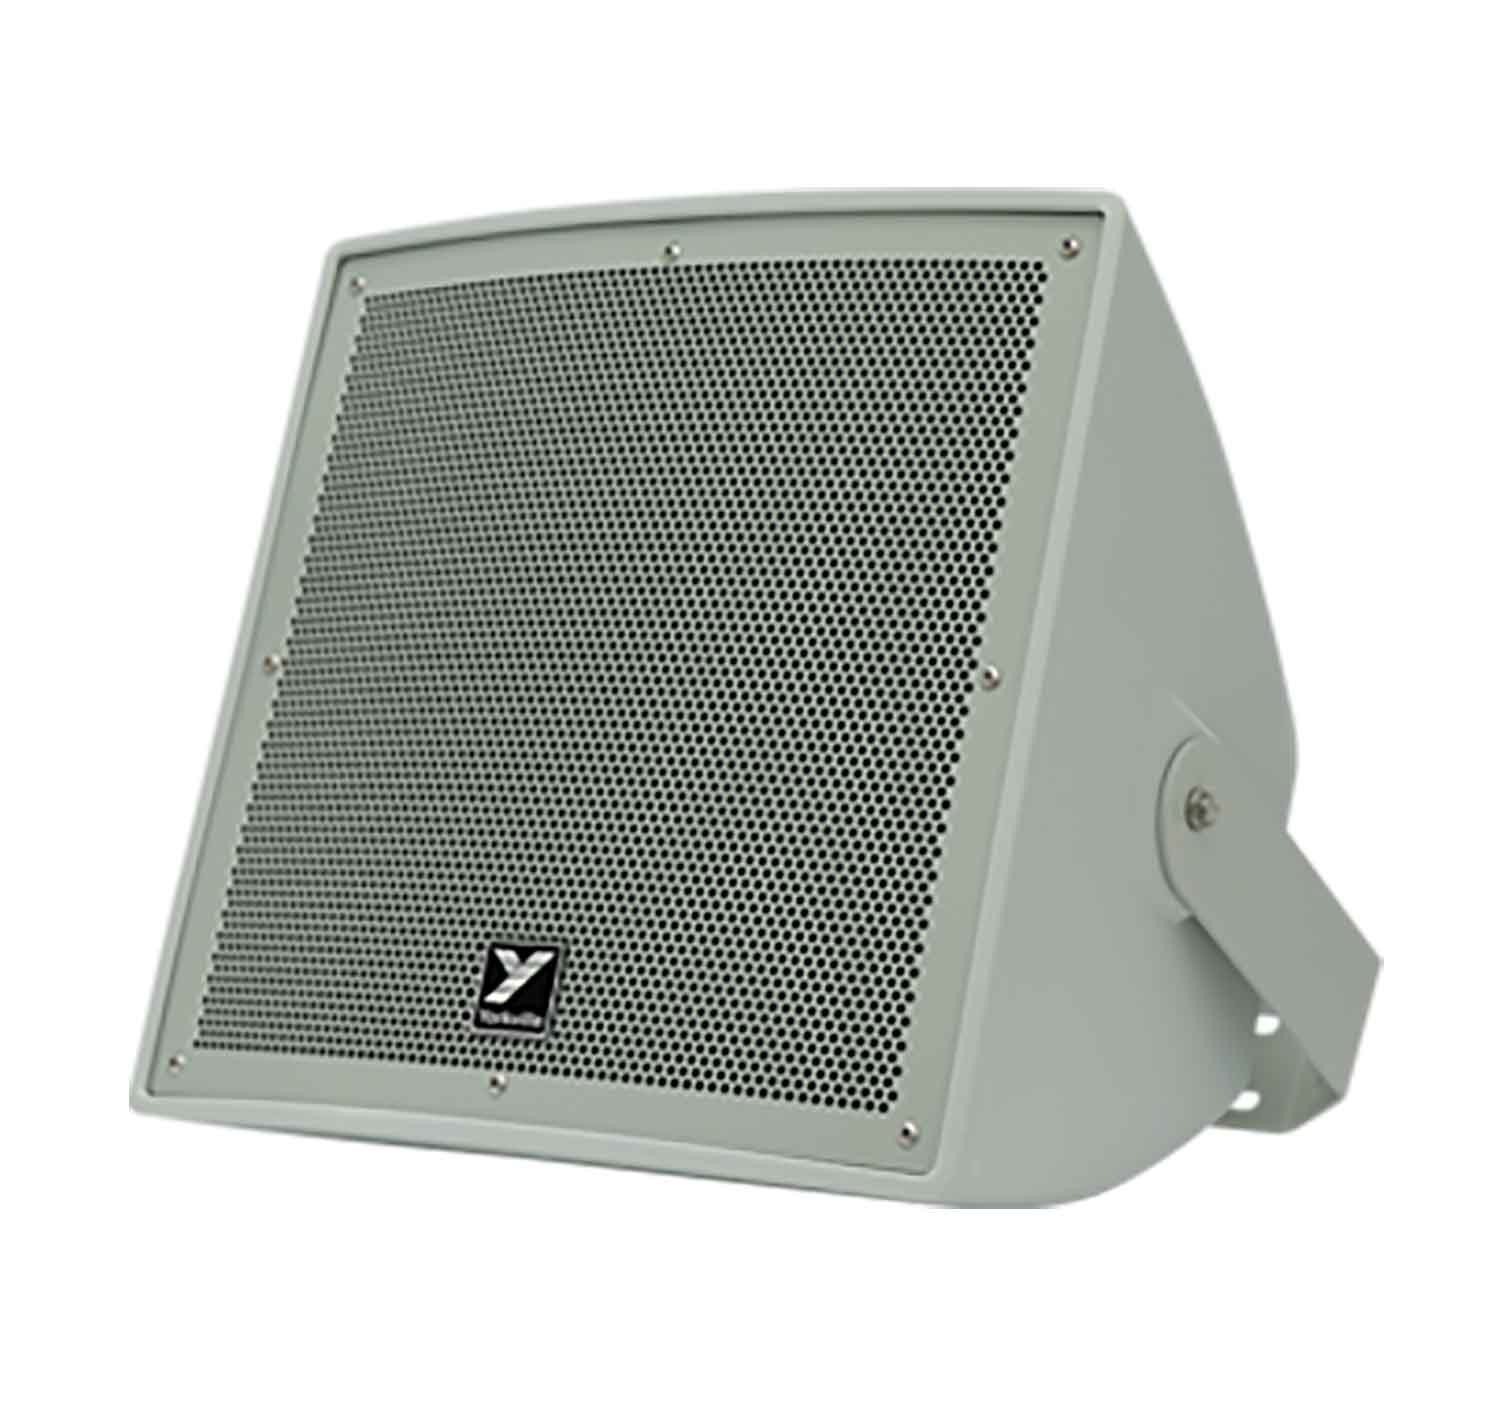 Yorkville Sound C08CW, Two-Way Coaxial Installation Loudspeaker - 8 Inch - Hollywood DJ